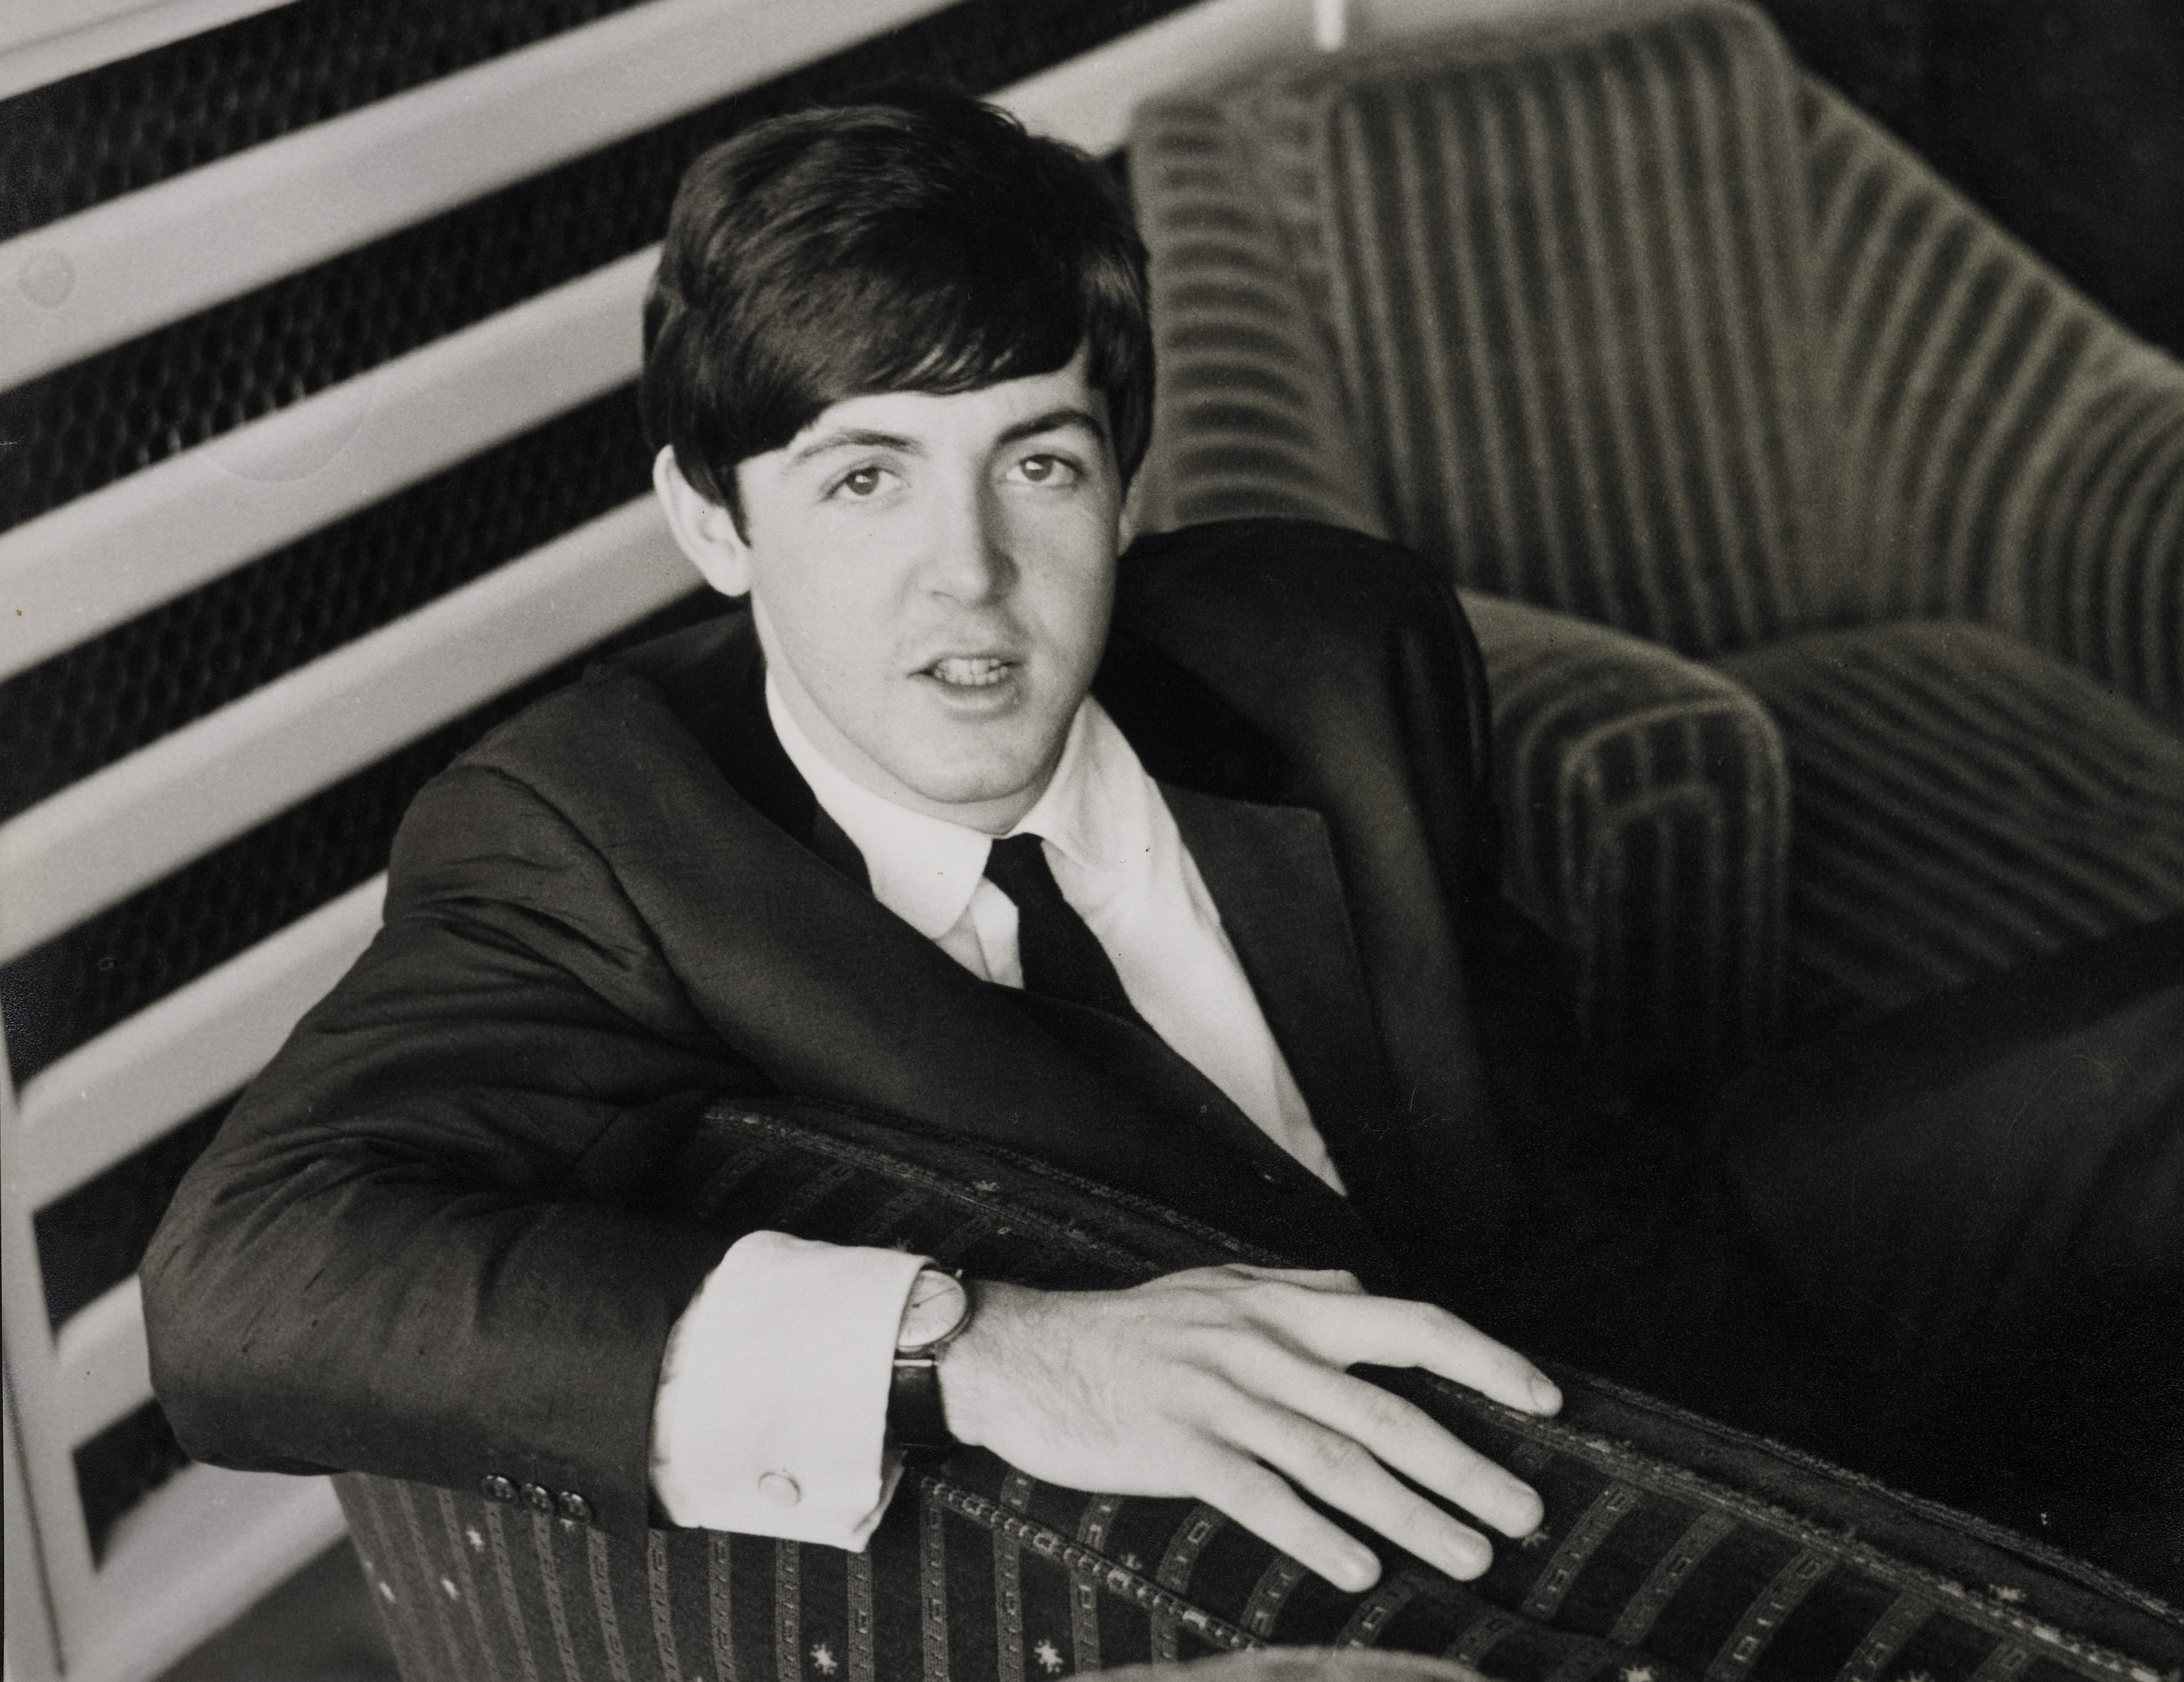 Paul McCartney looks at the camera while he's sitting down.